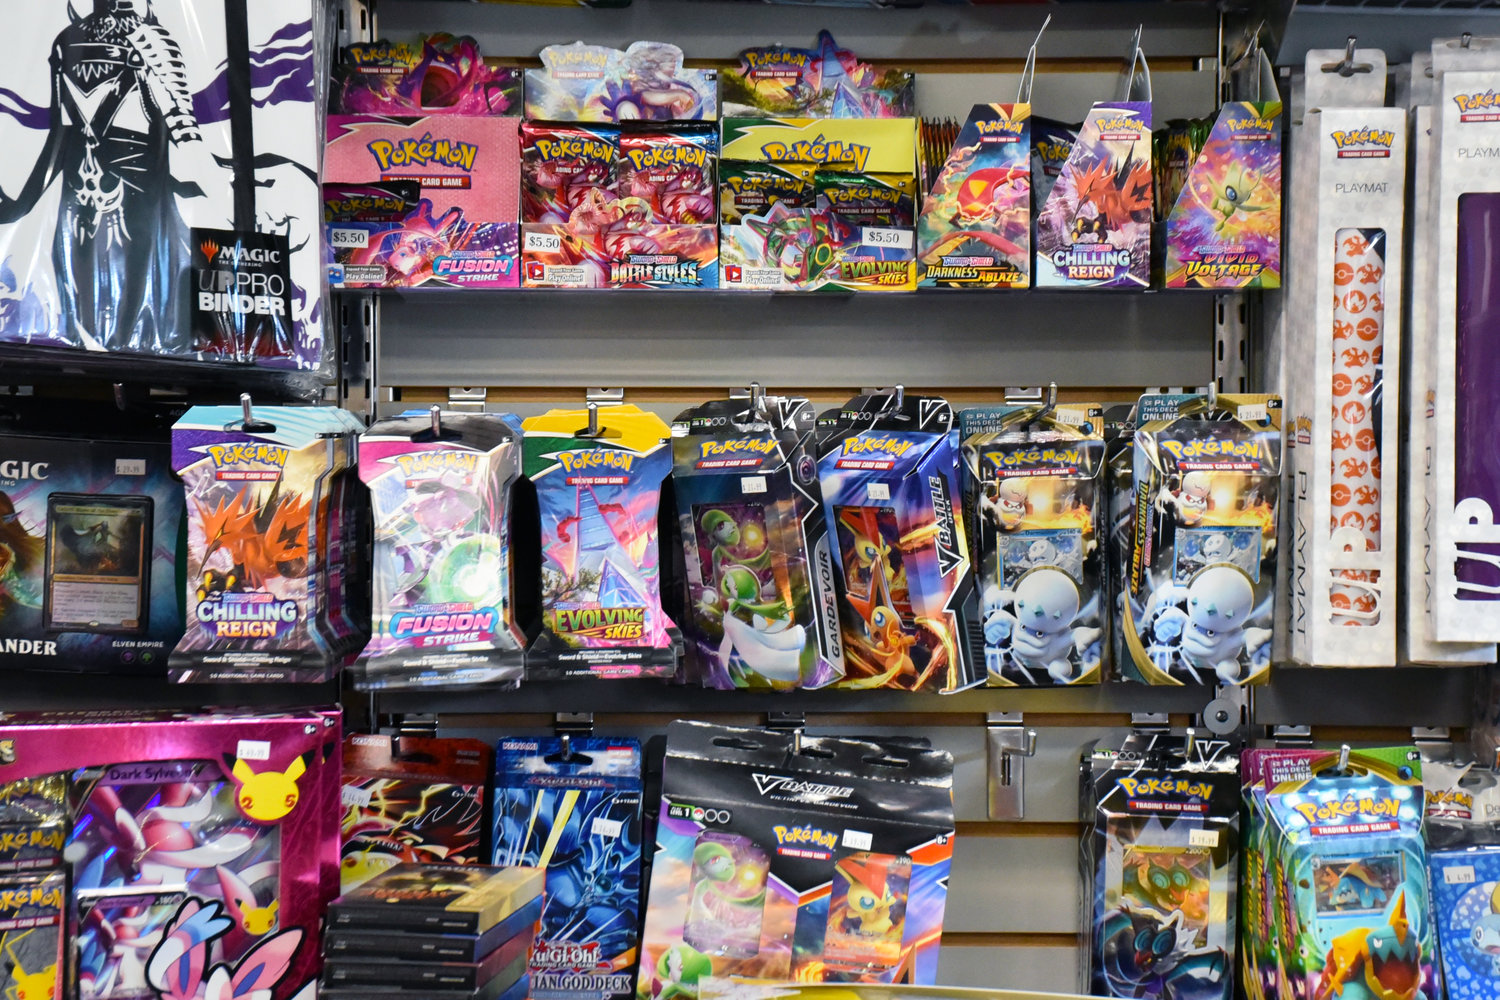 Pokemon cards were a Christmas must-have for many families this holiday season at Funtime Toys and Gifts in Yelm.